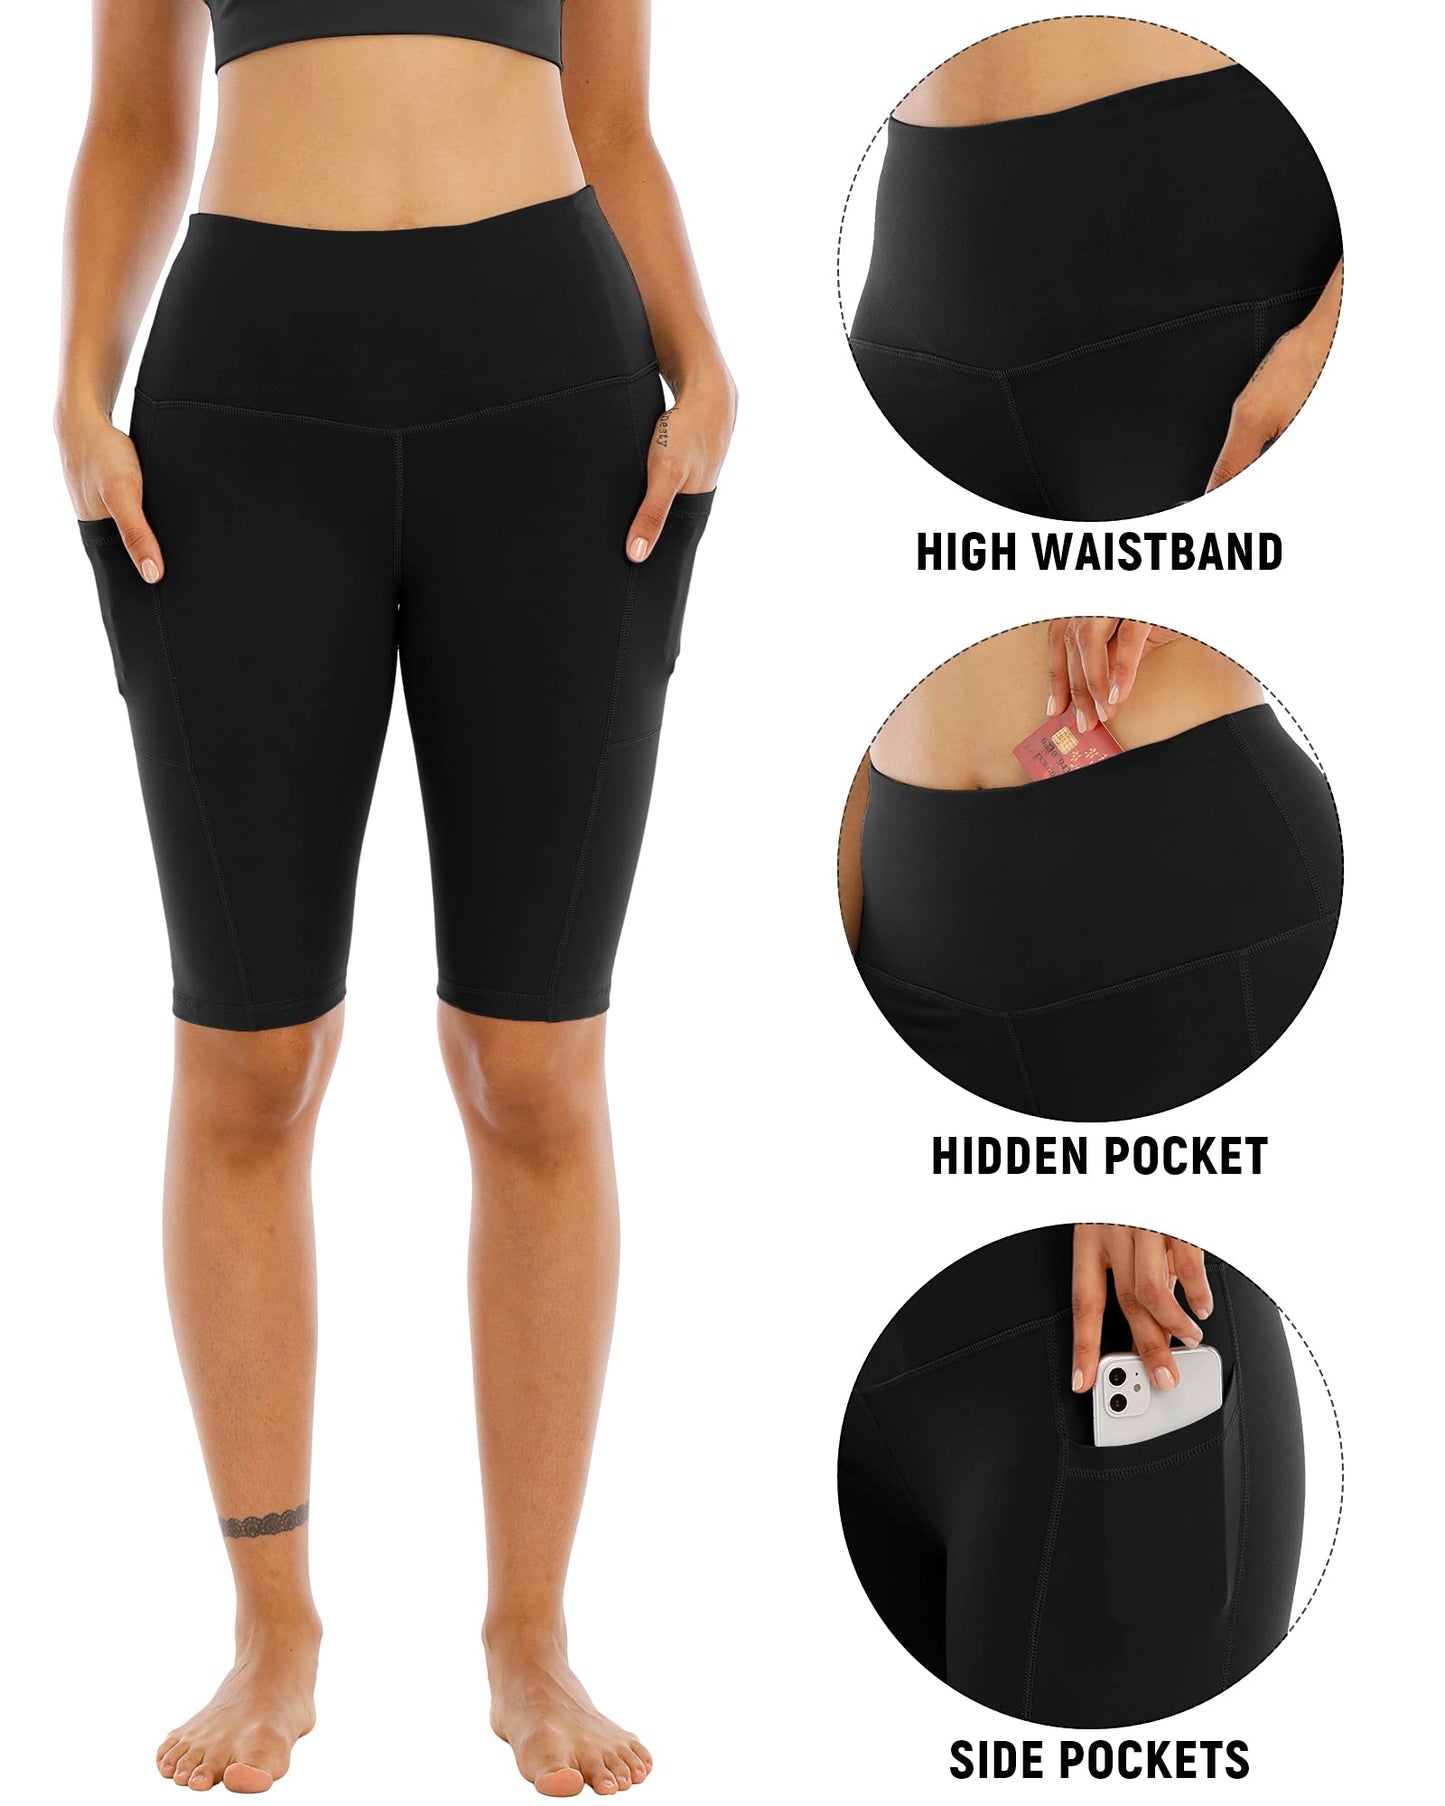 WHOUARE 4 Pack Biker Yoga Shorts with Pockets for Women,High Waisted Athletic Running Workout Gym Shorts Tummy Control,Black,Black,Black,Black,S